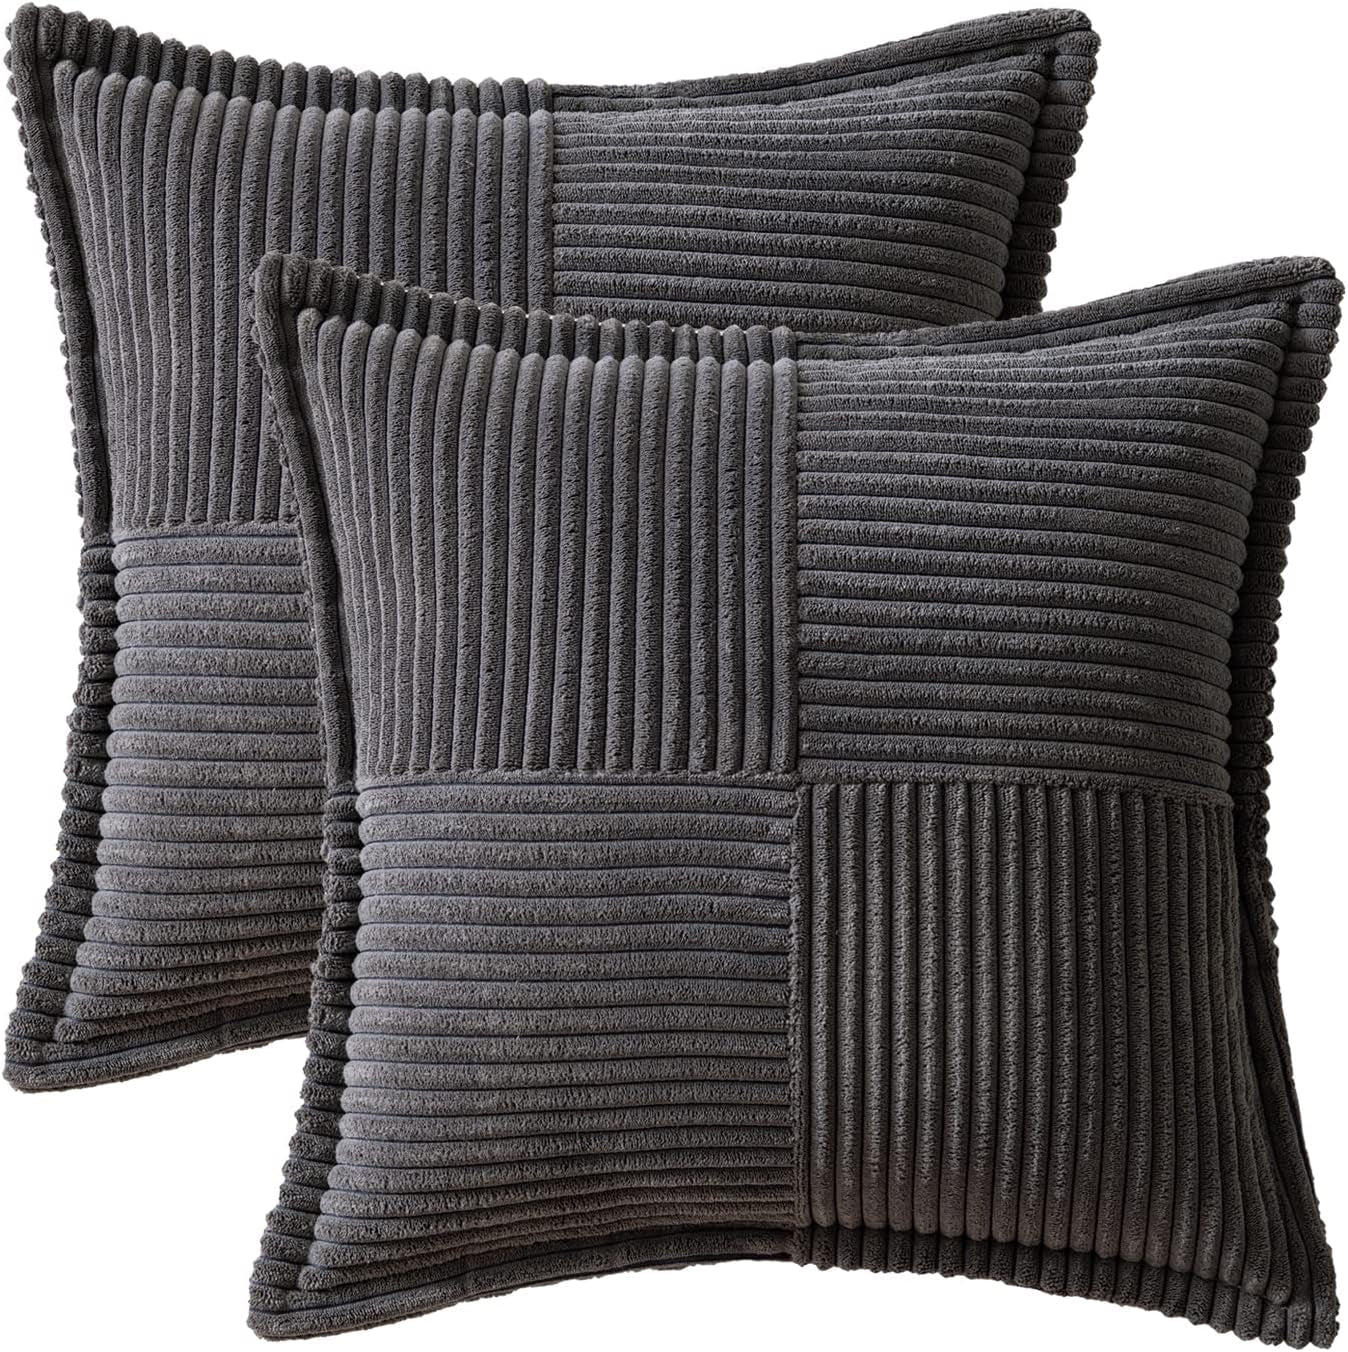 Dark Grey Corduroy Pillow Covers 18 X 18 Inch with Splicing Set of 2 